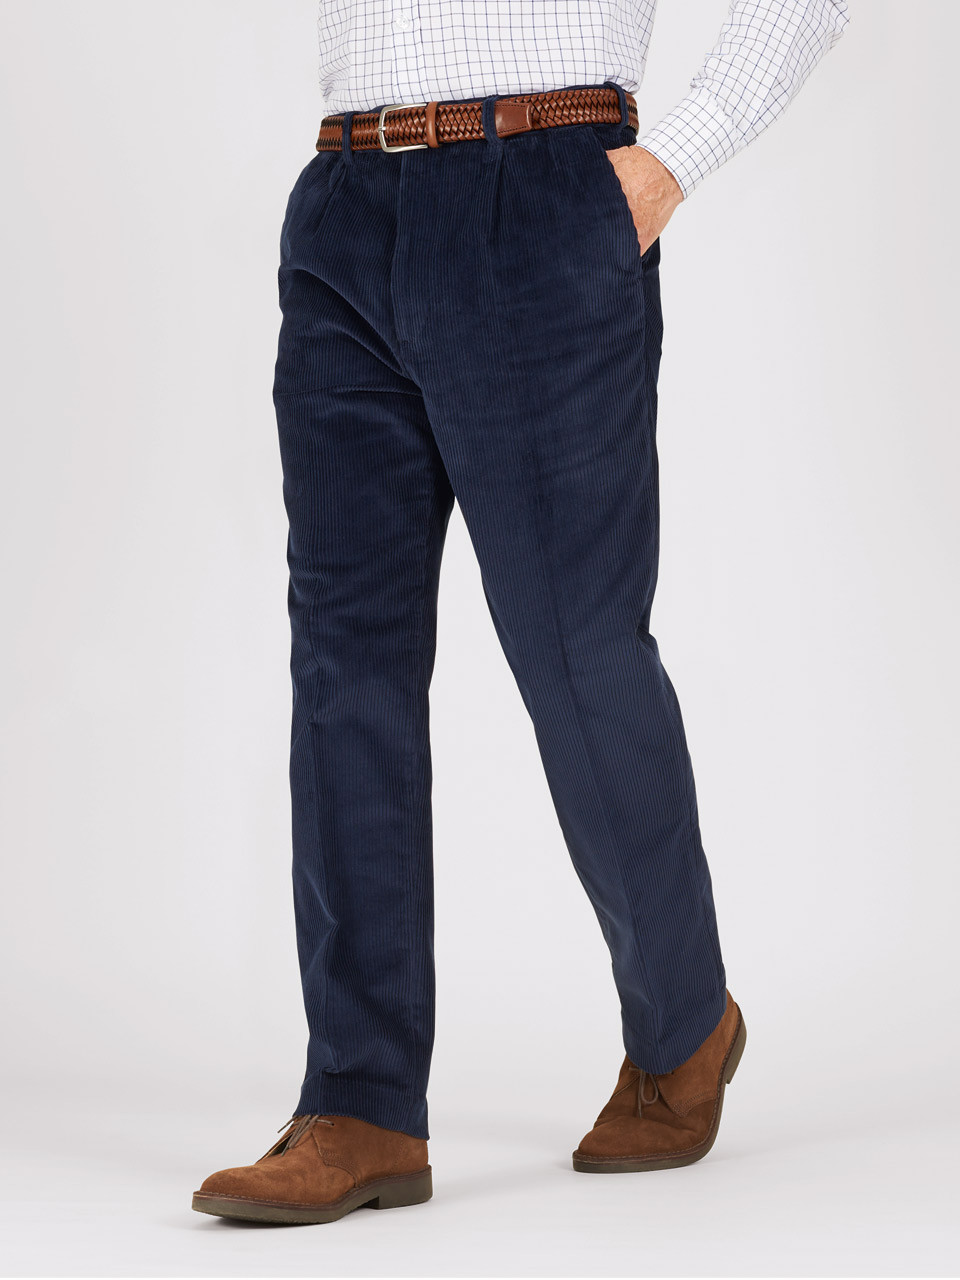 Navy Blue Corduroy Trousers - 8 Wales : Made To Measure Custom Jeans For Men  & Women, MakeYourOwnJeans®